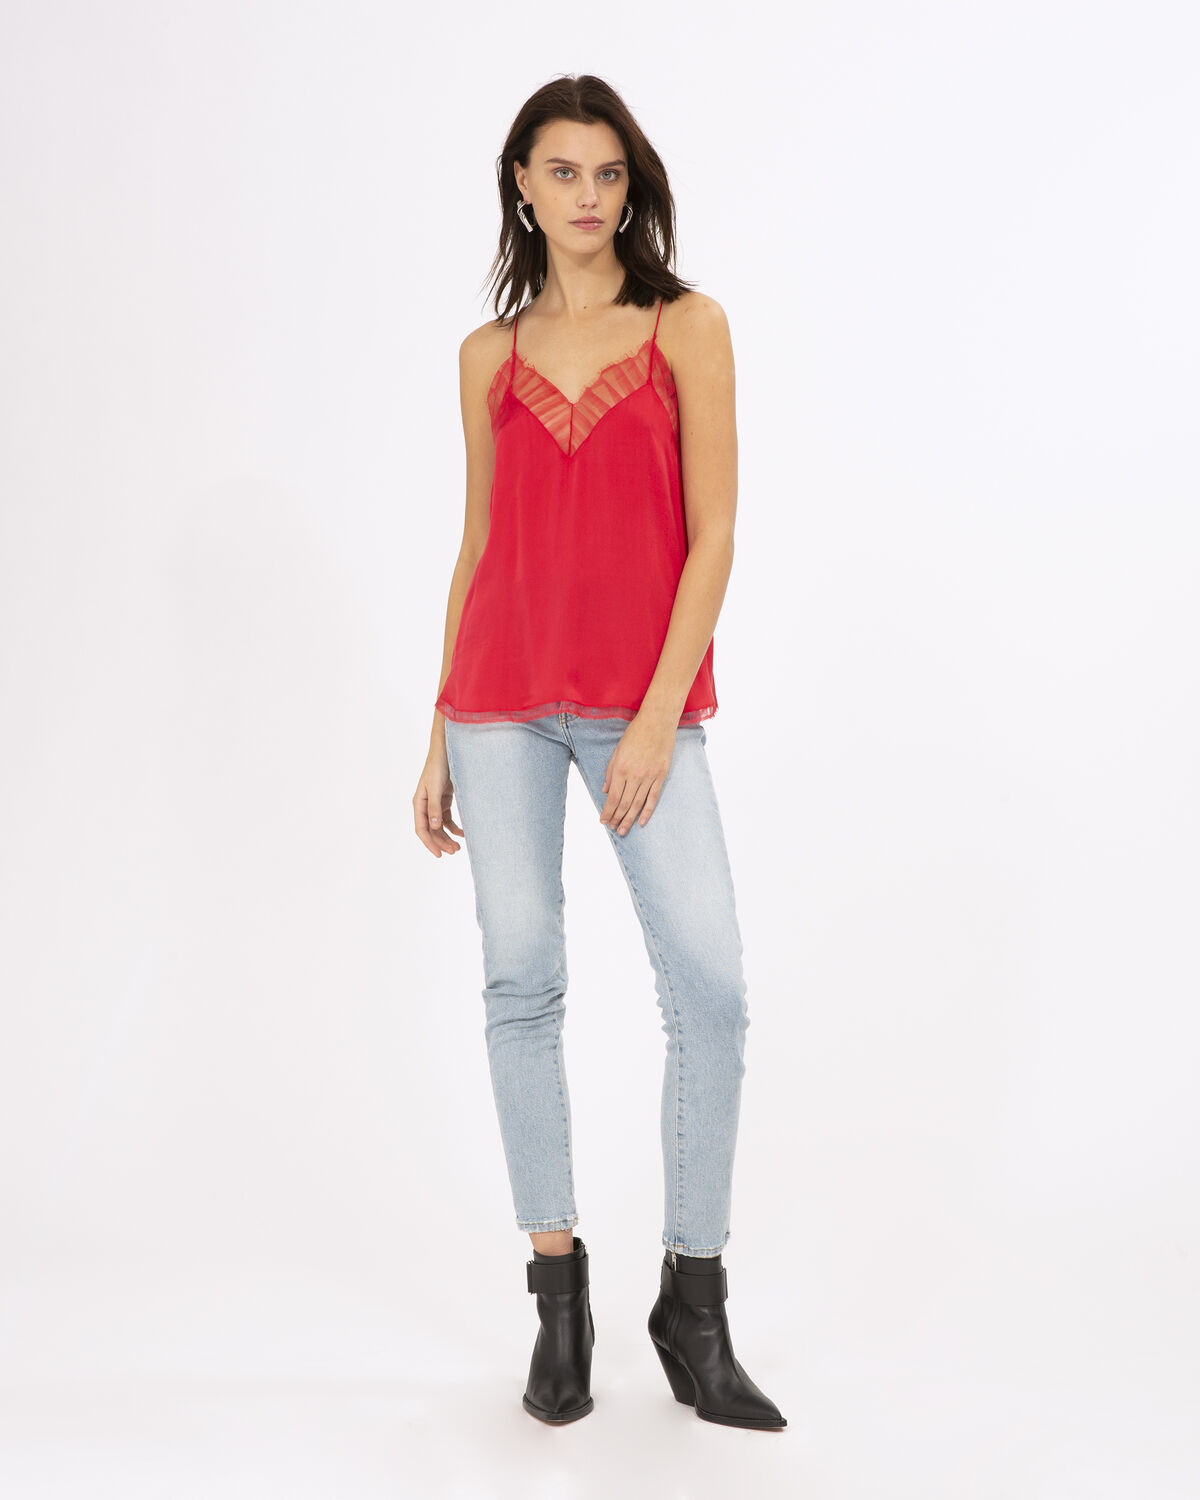 Photo of IRO Paris Berwyn Top Coral - Fluid And Airy, This Silk Top Is Distinguished By Its Lace Details, For A Romantic And Refined Look. It Is One Of Iro's Most Iconic Pieces. New In